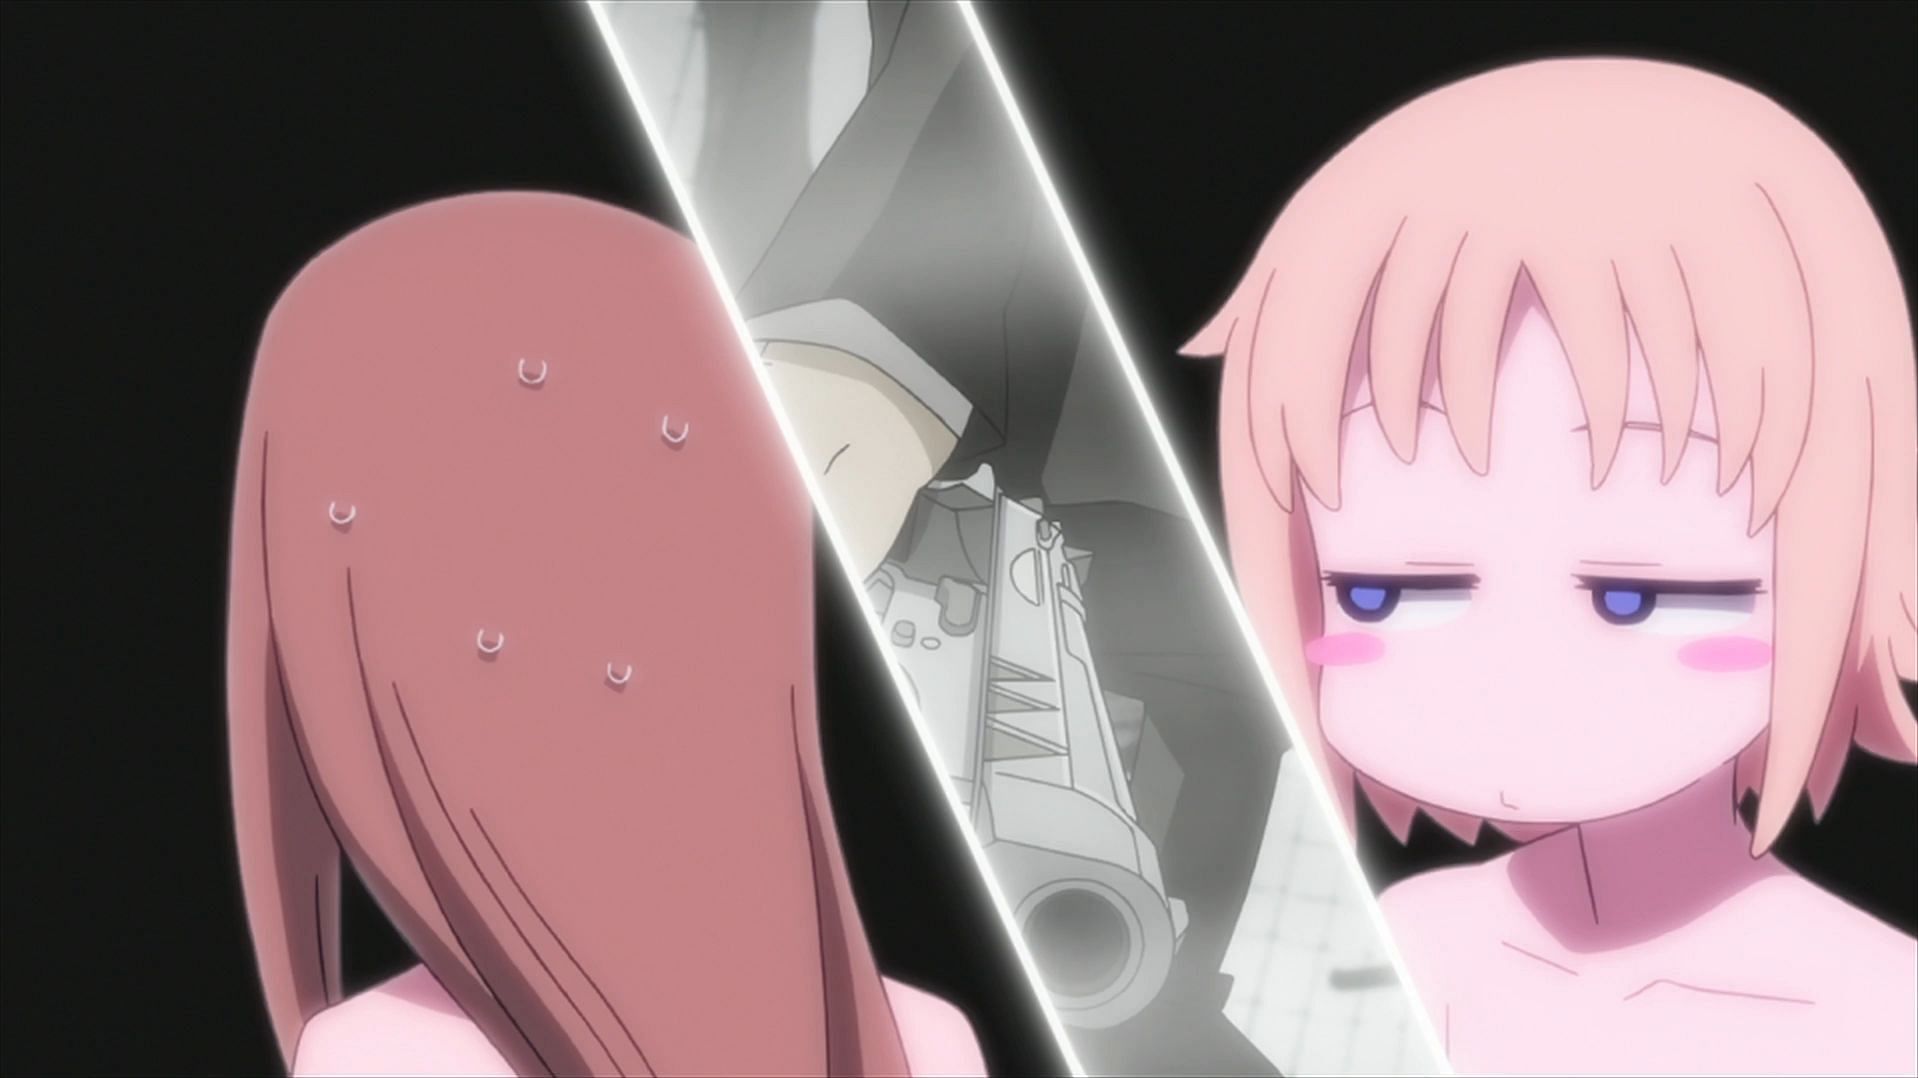 Liz mocks Patty in weapon space in Soul Eater (Image courtesy of Aniplex)